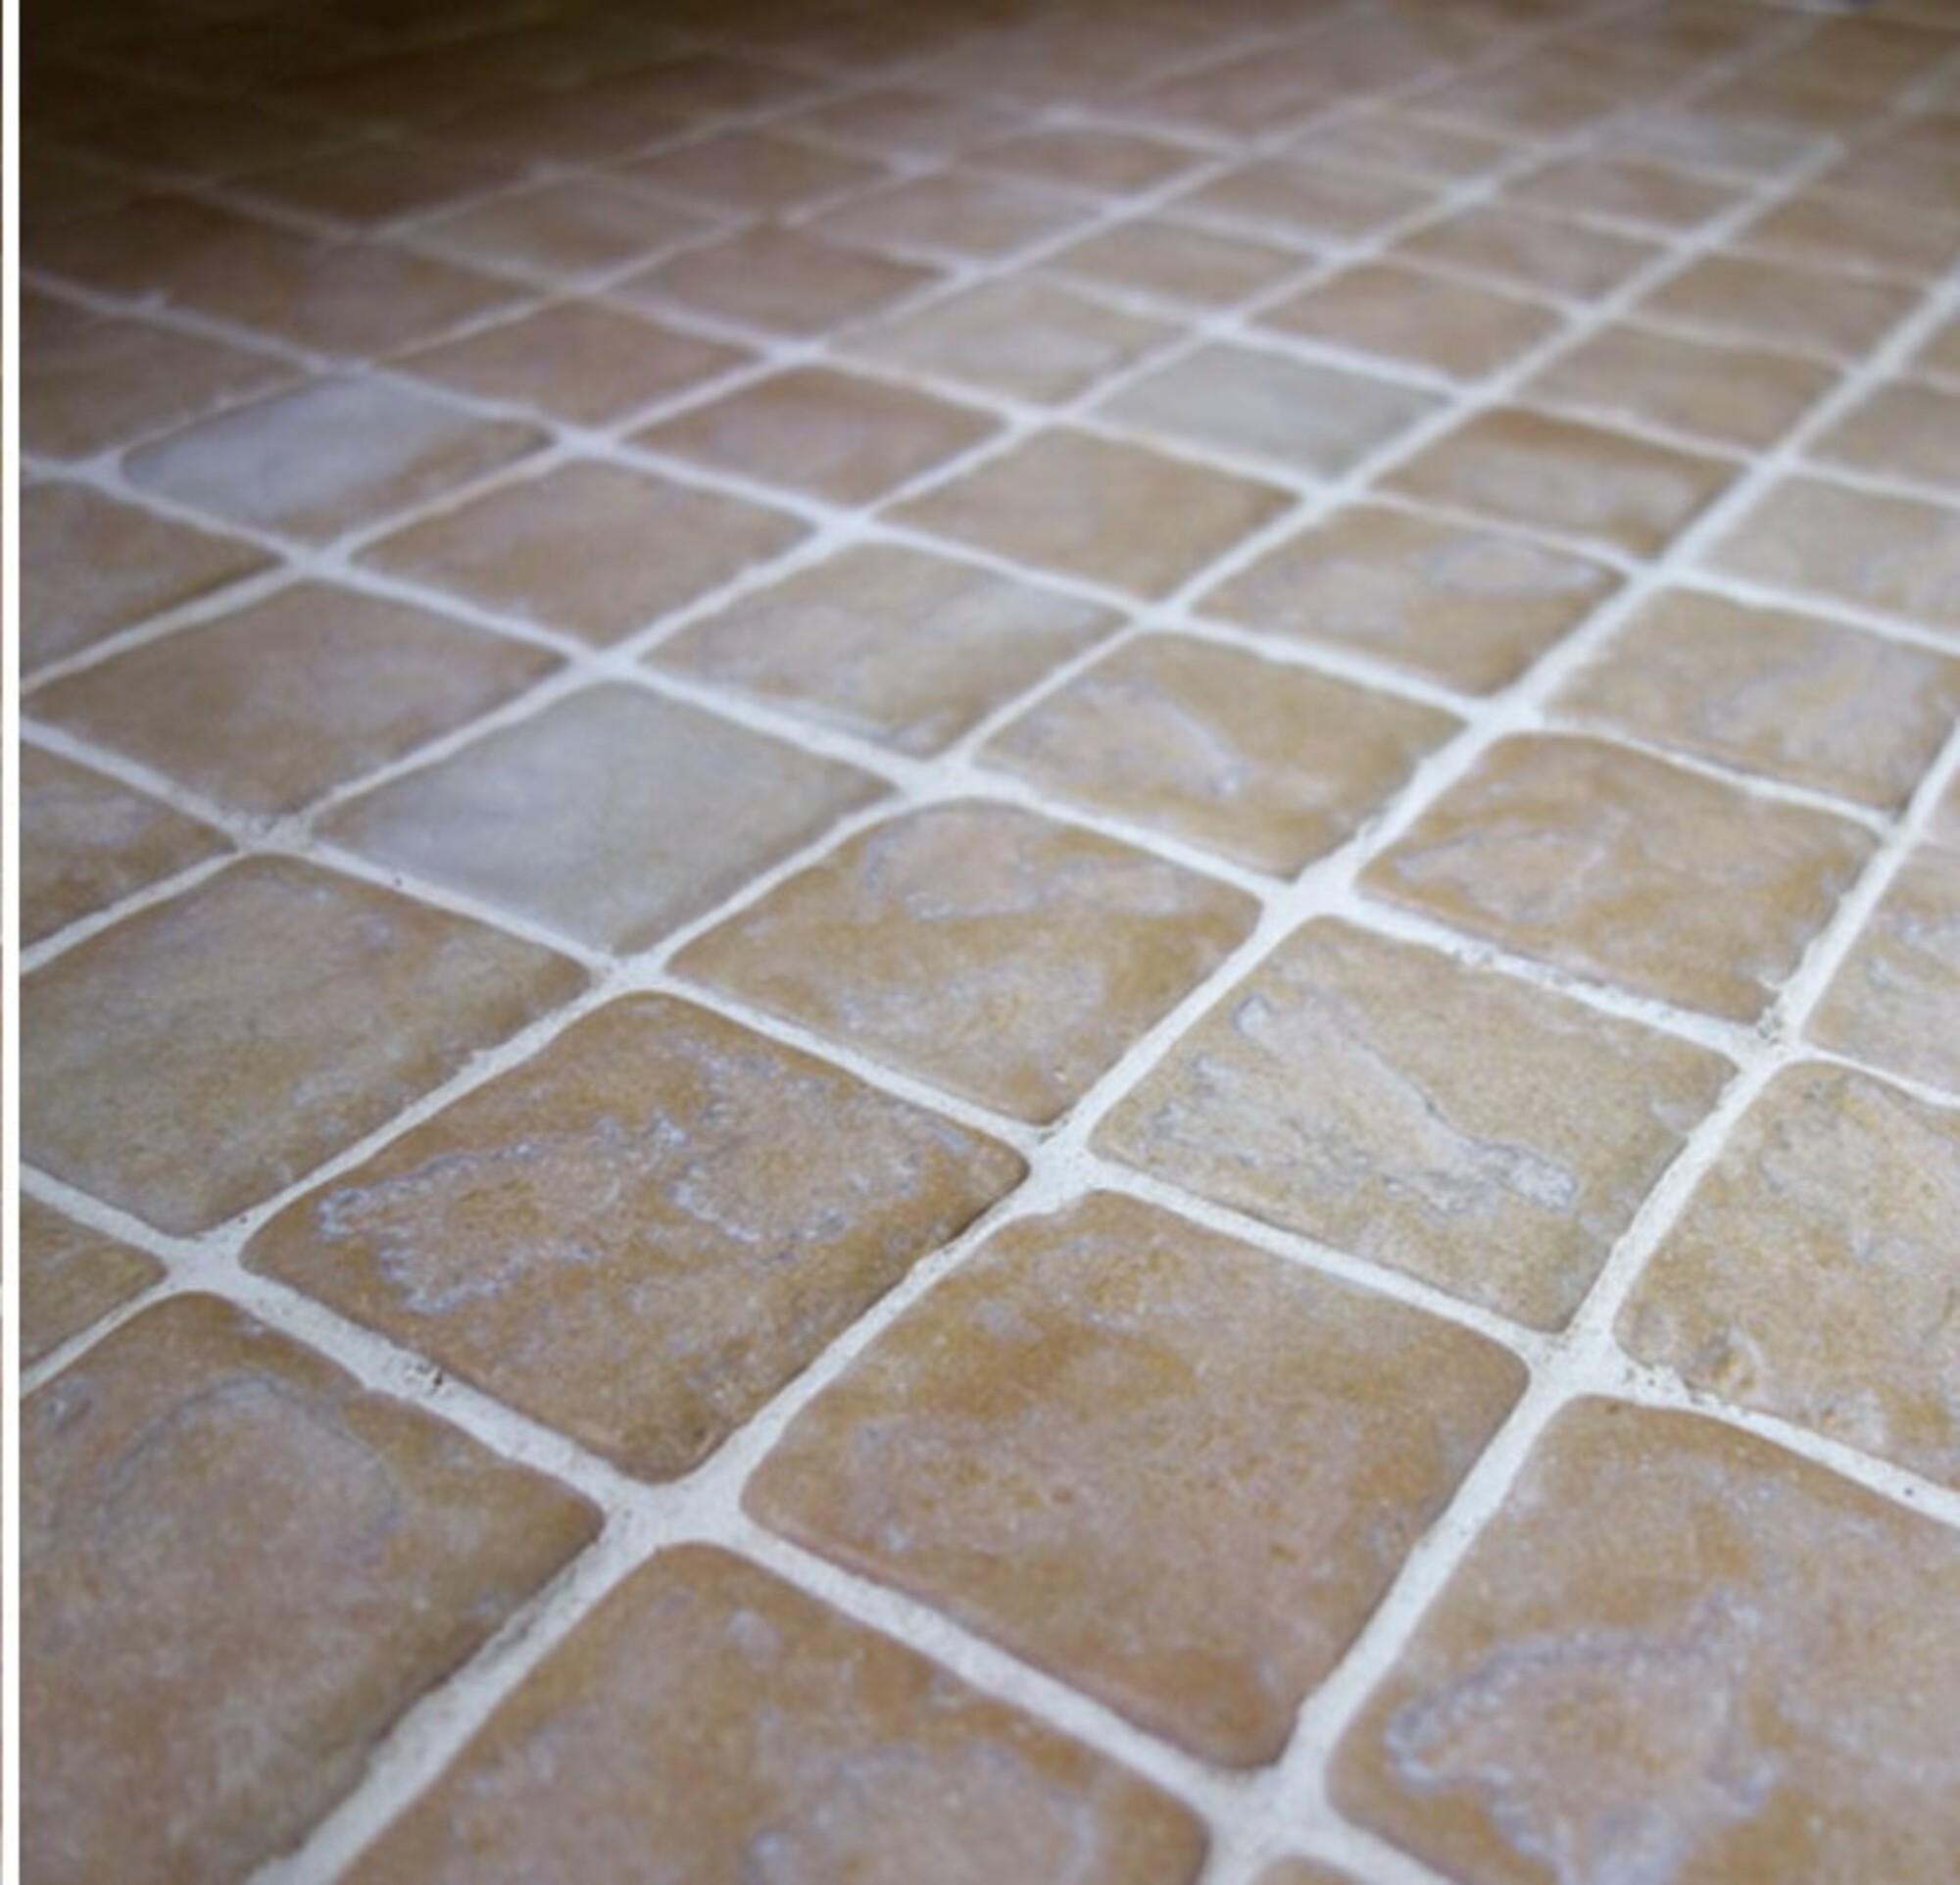 Grout Haze Remover Residue, What Gets Grout Residue Off Tiles